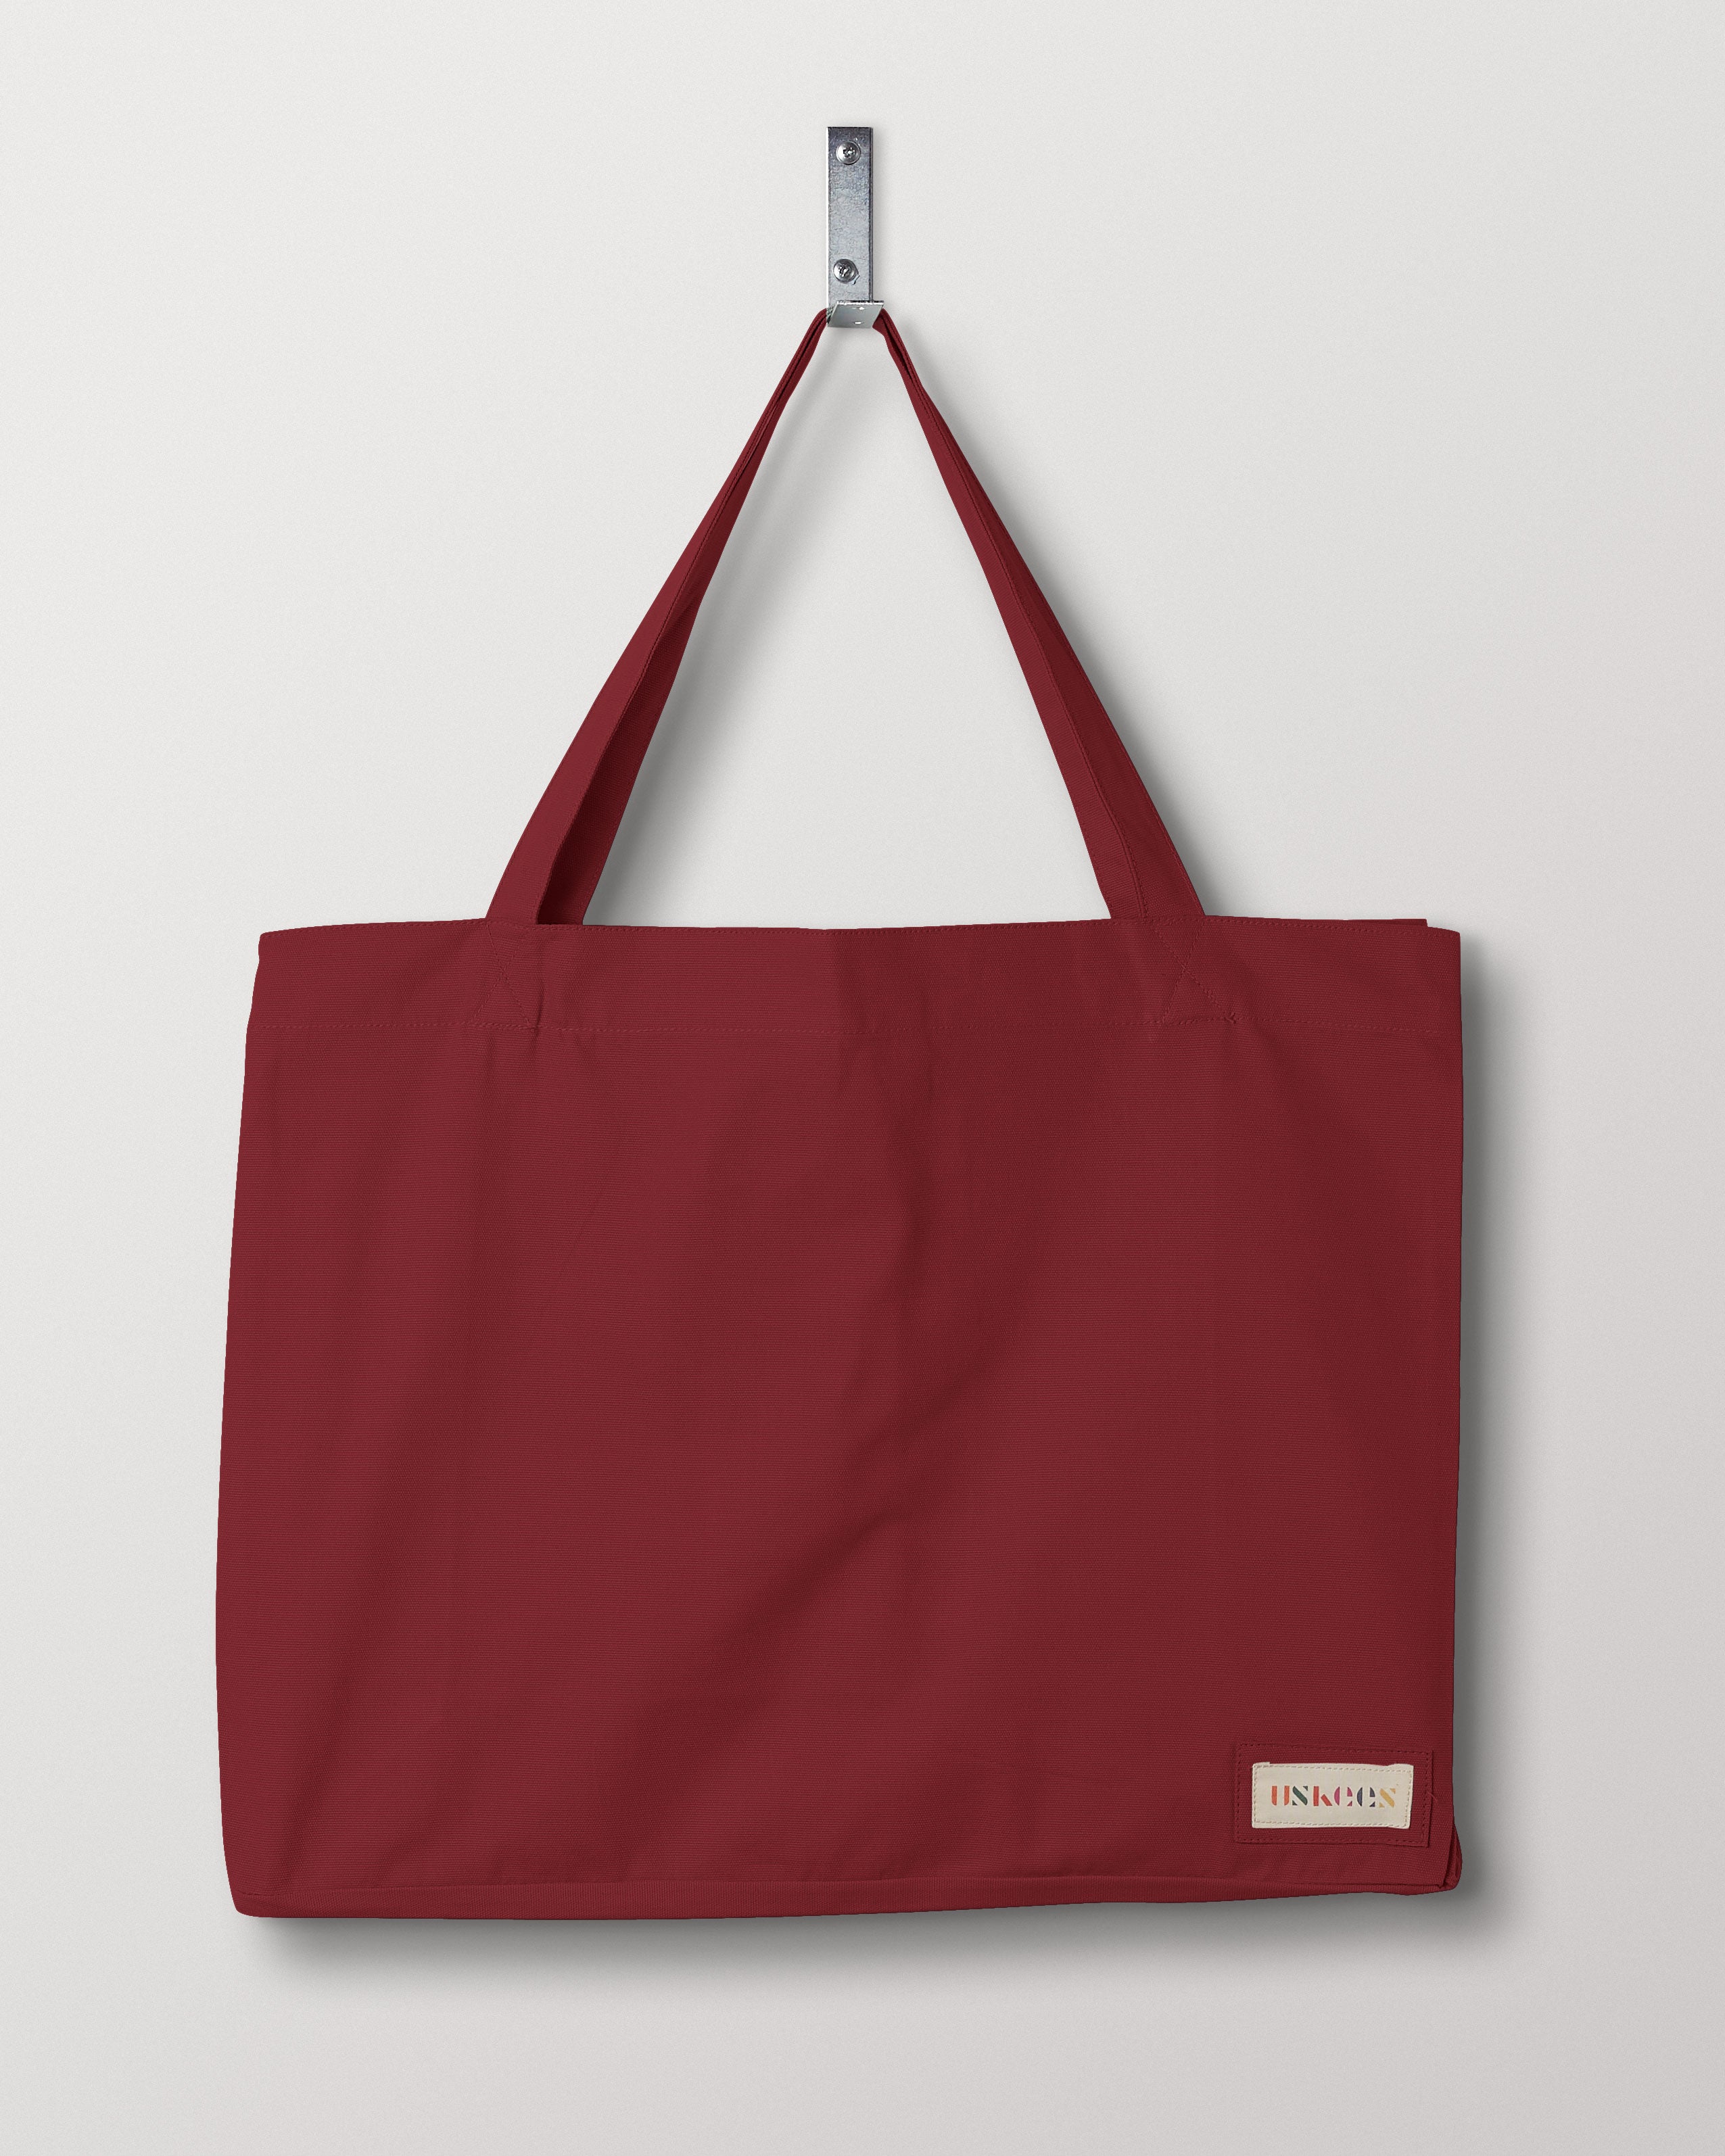 Full front flat shot of Uskees #4001, large 'merlot' coloured tote bag, showing double handles and Uskees woven logo.